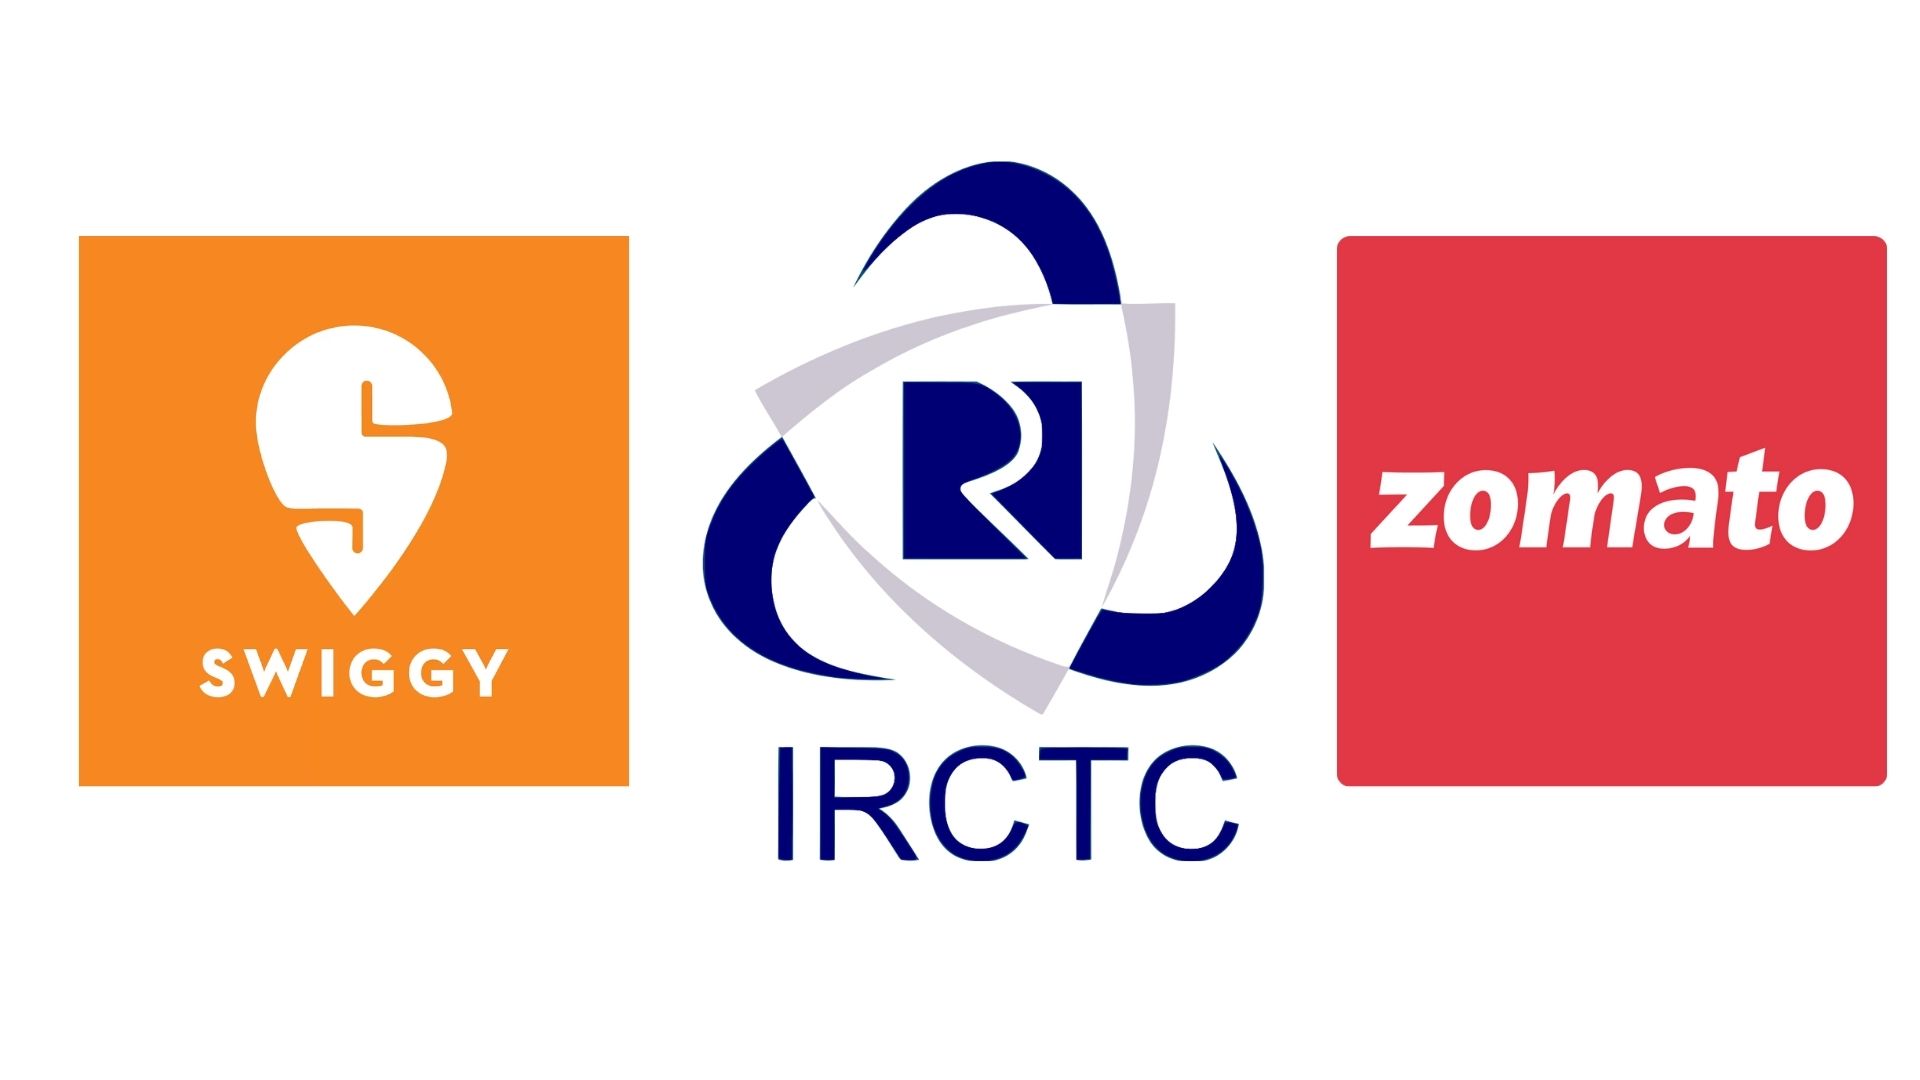 IRCTC Partners with This Food Delivery App to Enhance Catering Services